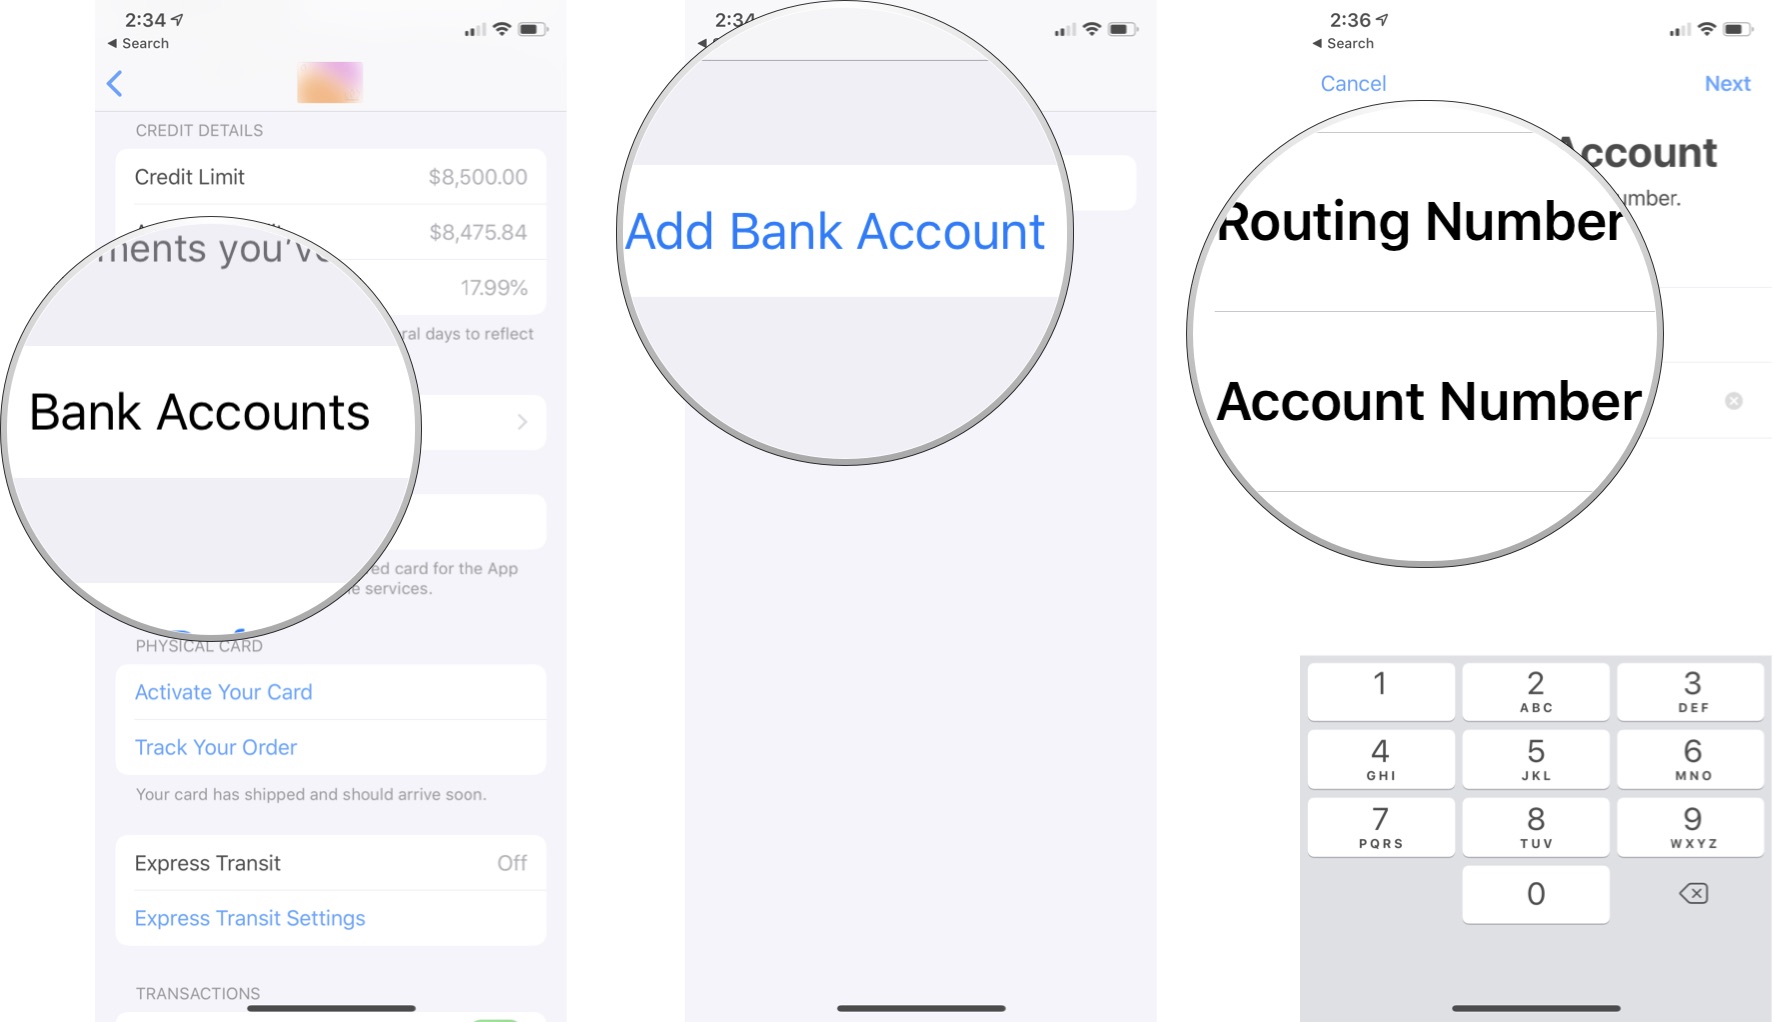 Tap Bank Accounts, then tap Add Bank Account, then enter your routing number and bank account number